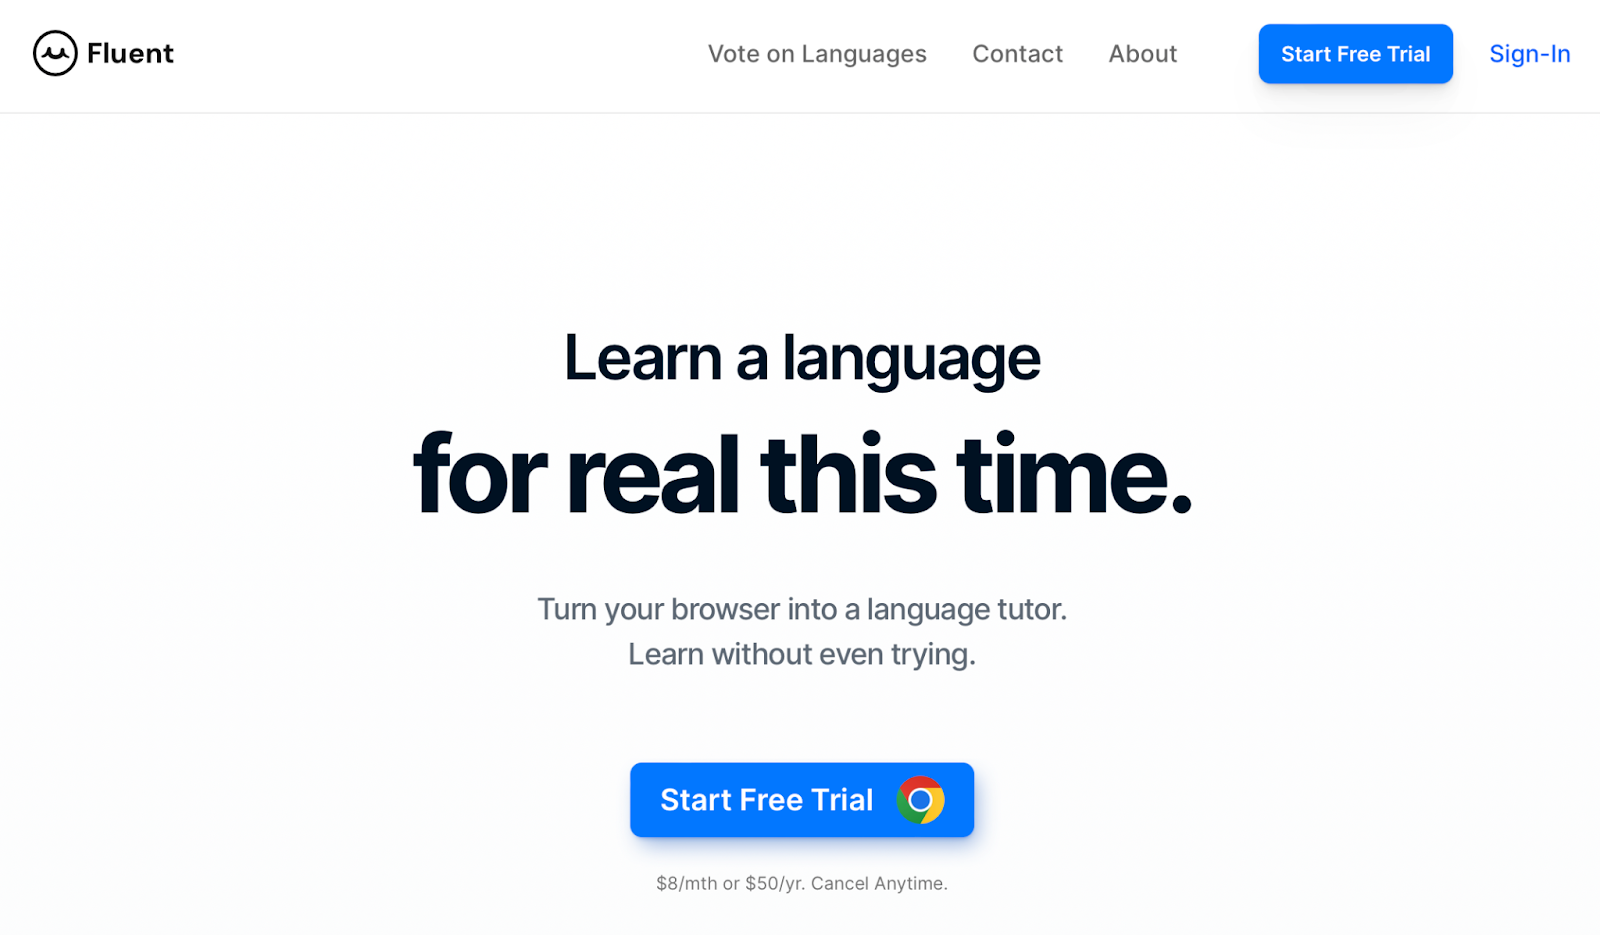 Fluent is an AI-powered tool designed to translate words on websites to help learn other languages